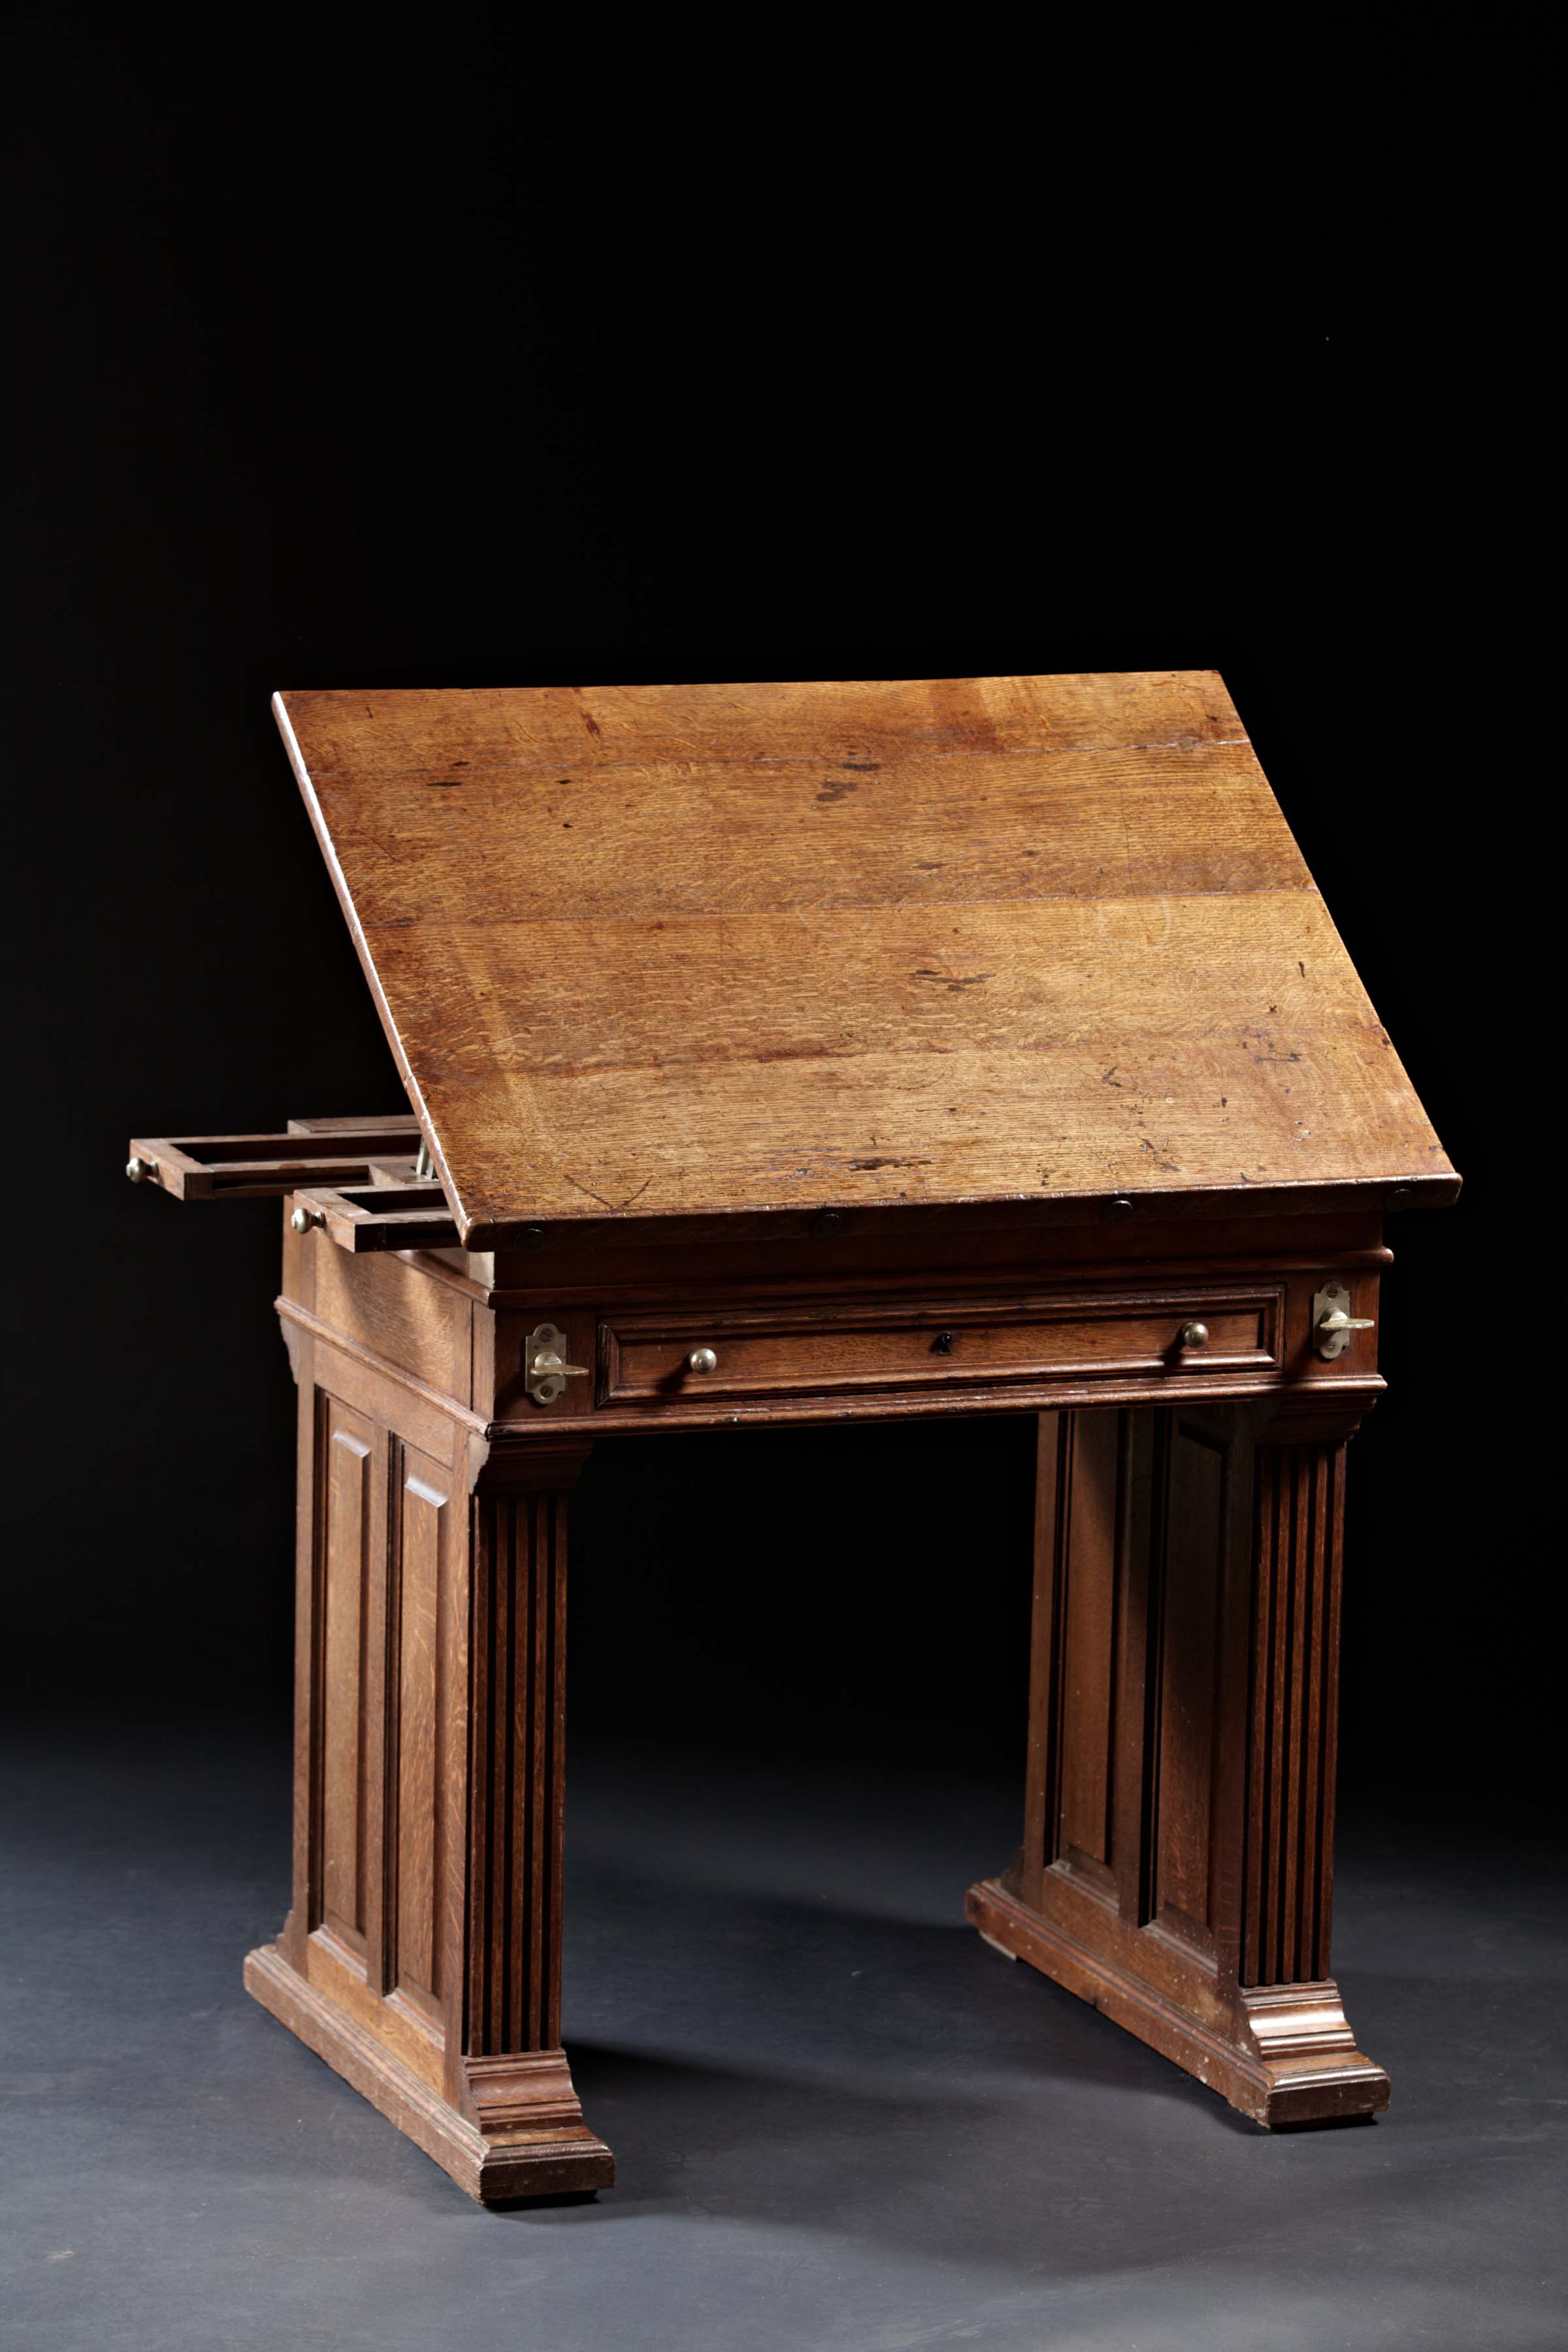 An Arts and Crafts Period Oak Drafting Table with Adjustable Slope